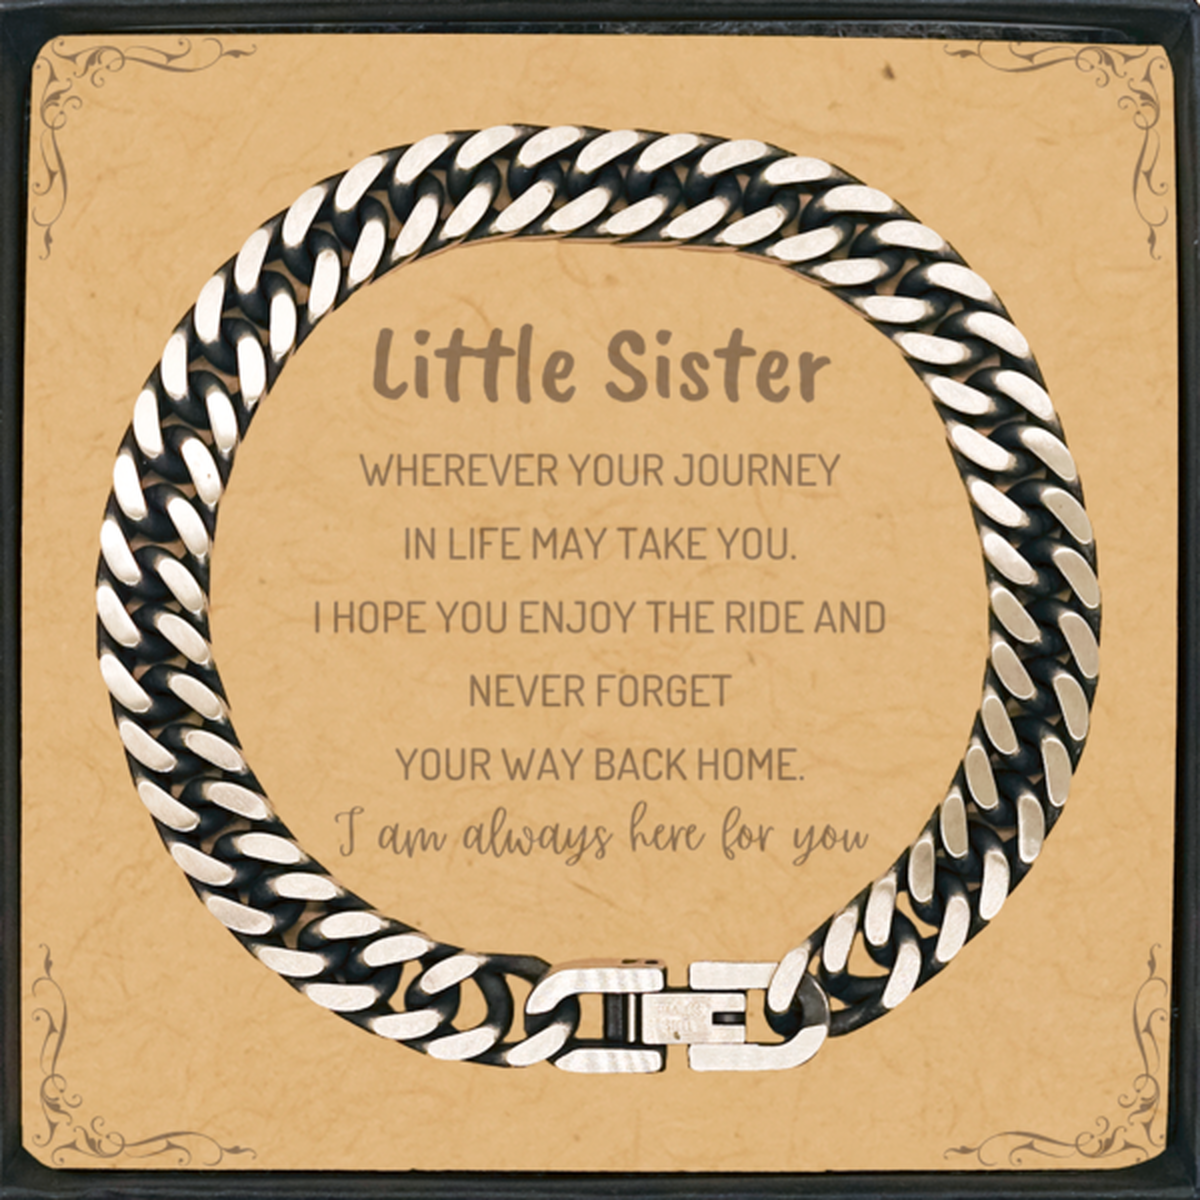 Little Sister wherever your journey in life may take you, I am always here for you Little Sister Cuban Link Chain Bracelet, Awesome Christmas Gifts For Little Sister Message Card, Little Sister Birthday Gifts for Men Women Family Loved One